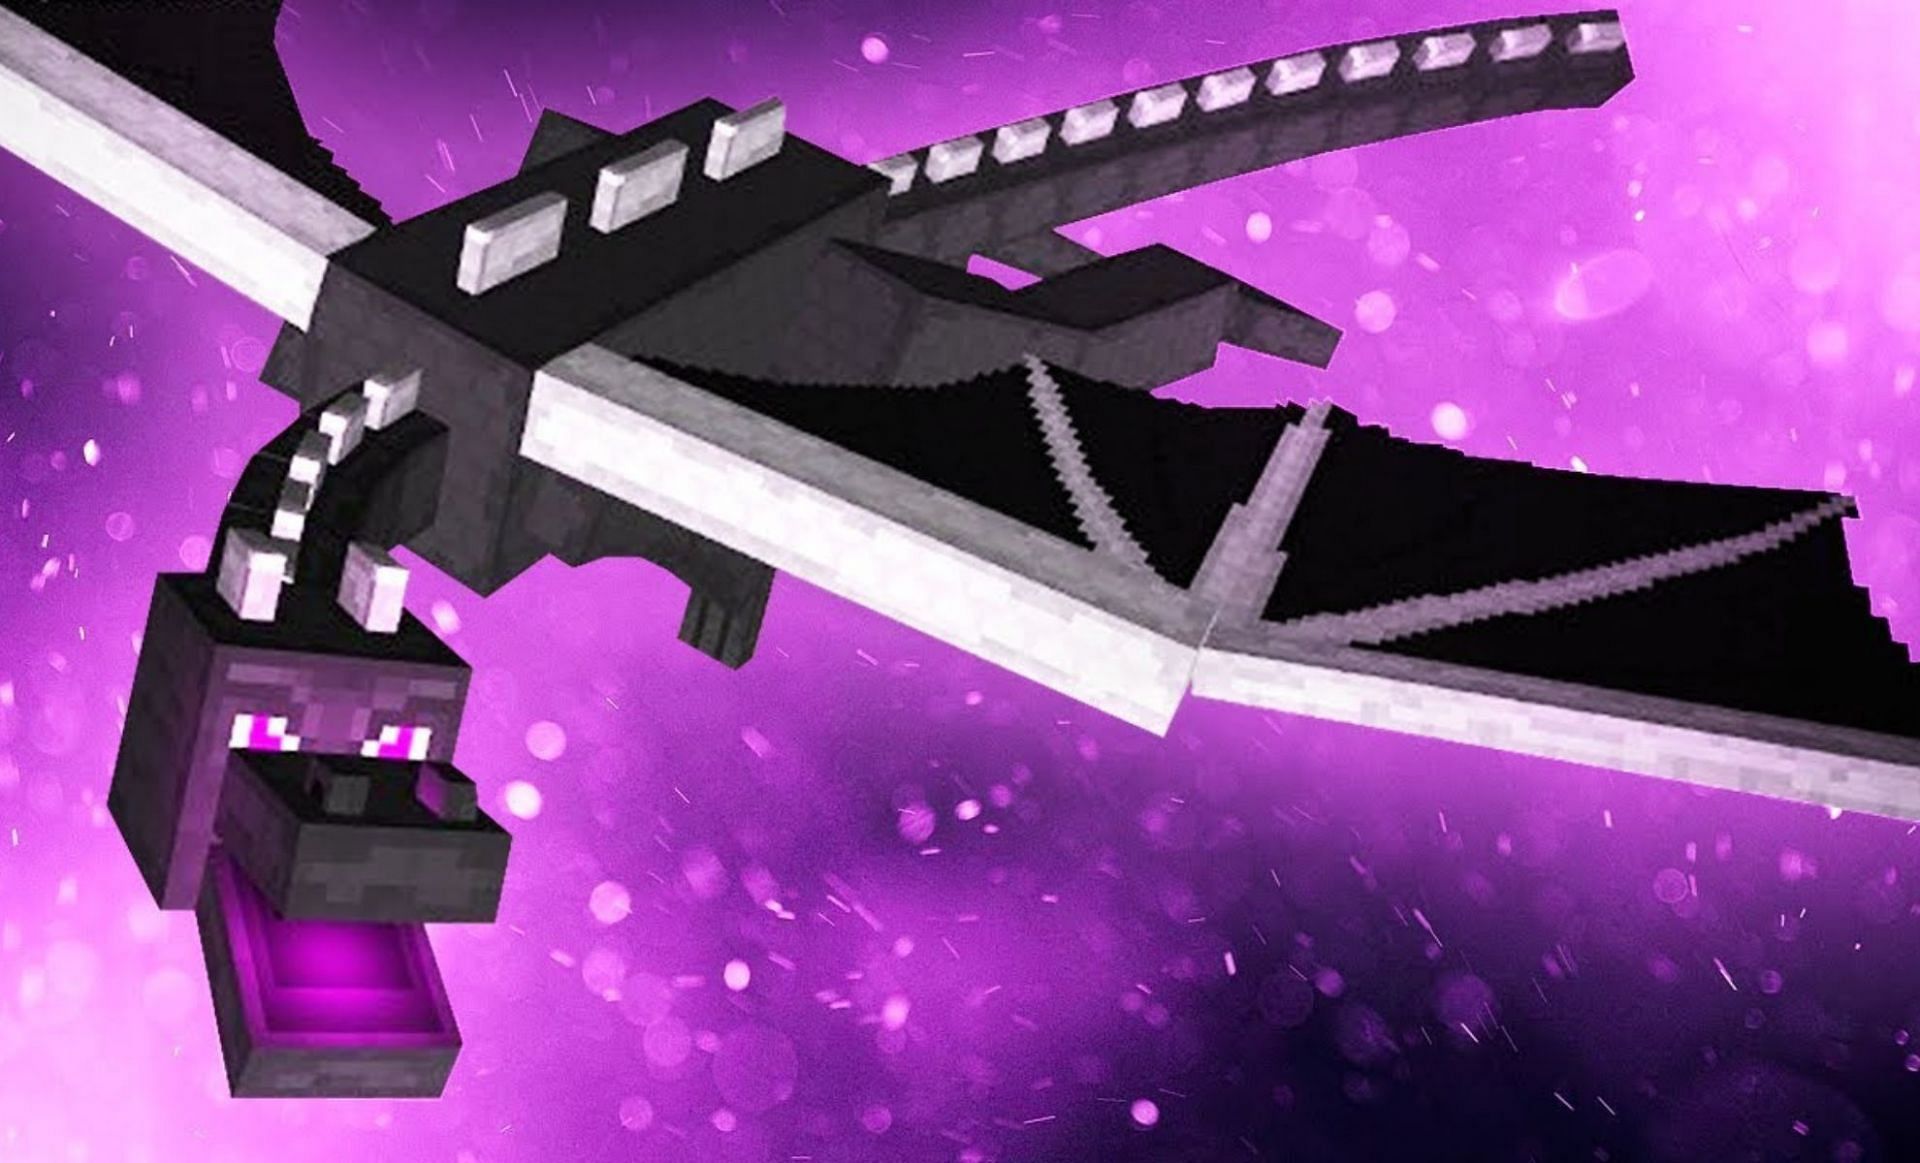 The Ender Dragon will go against the Wither in the vote (Image via Cubey on YouTube)